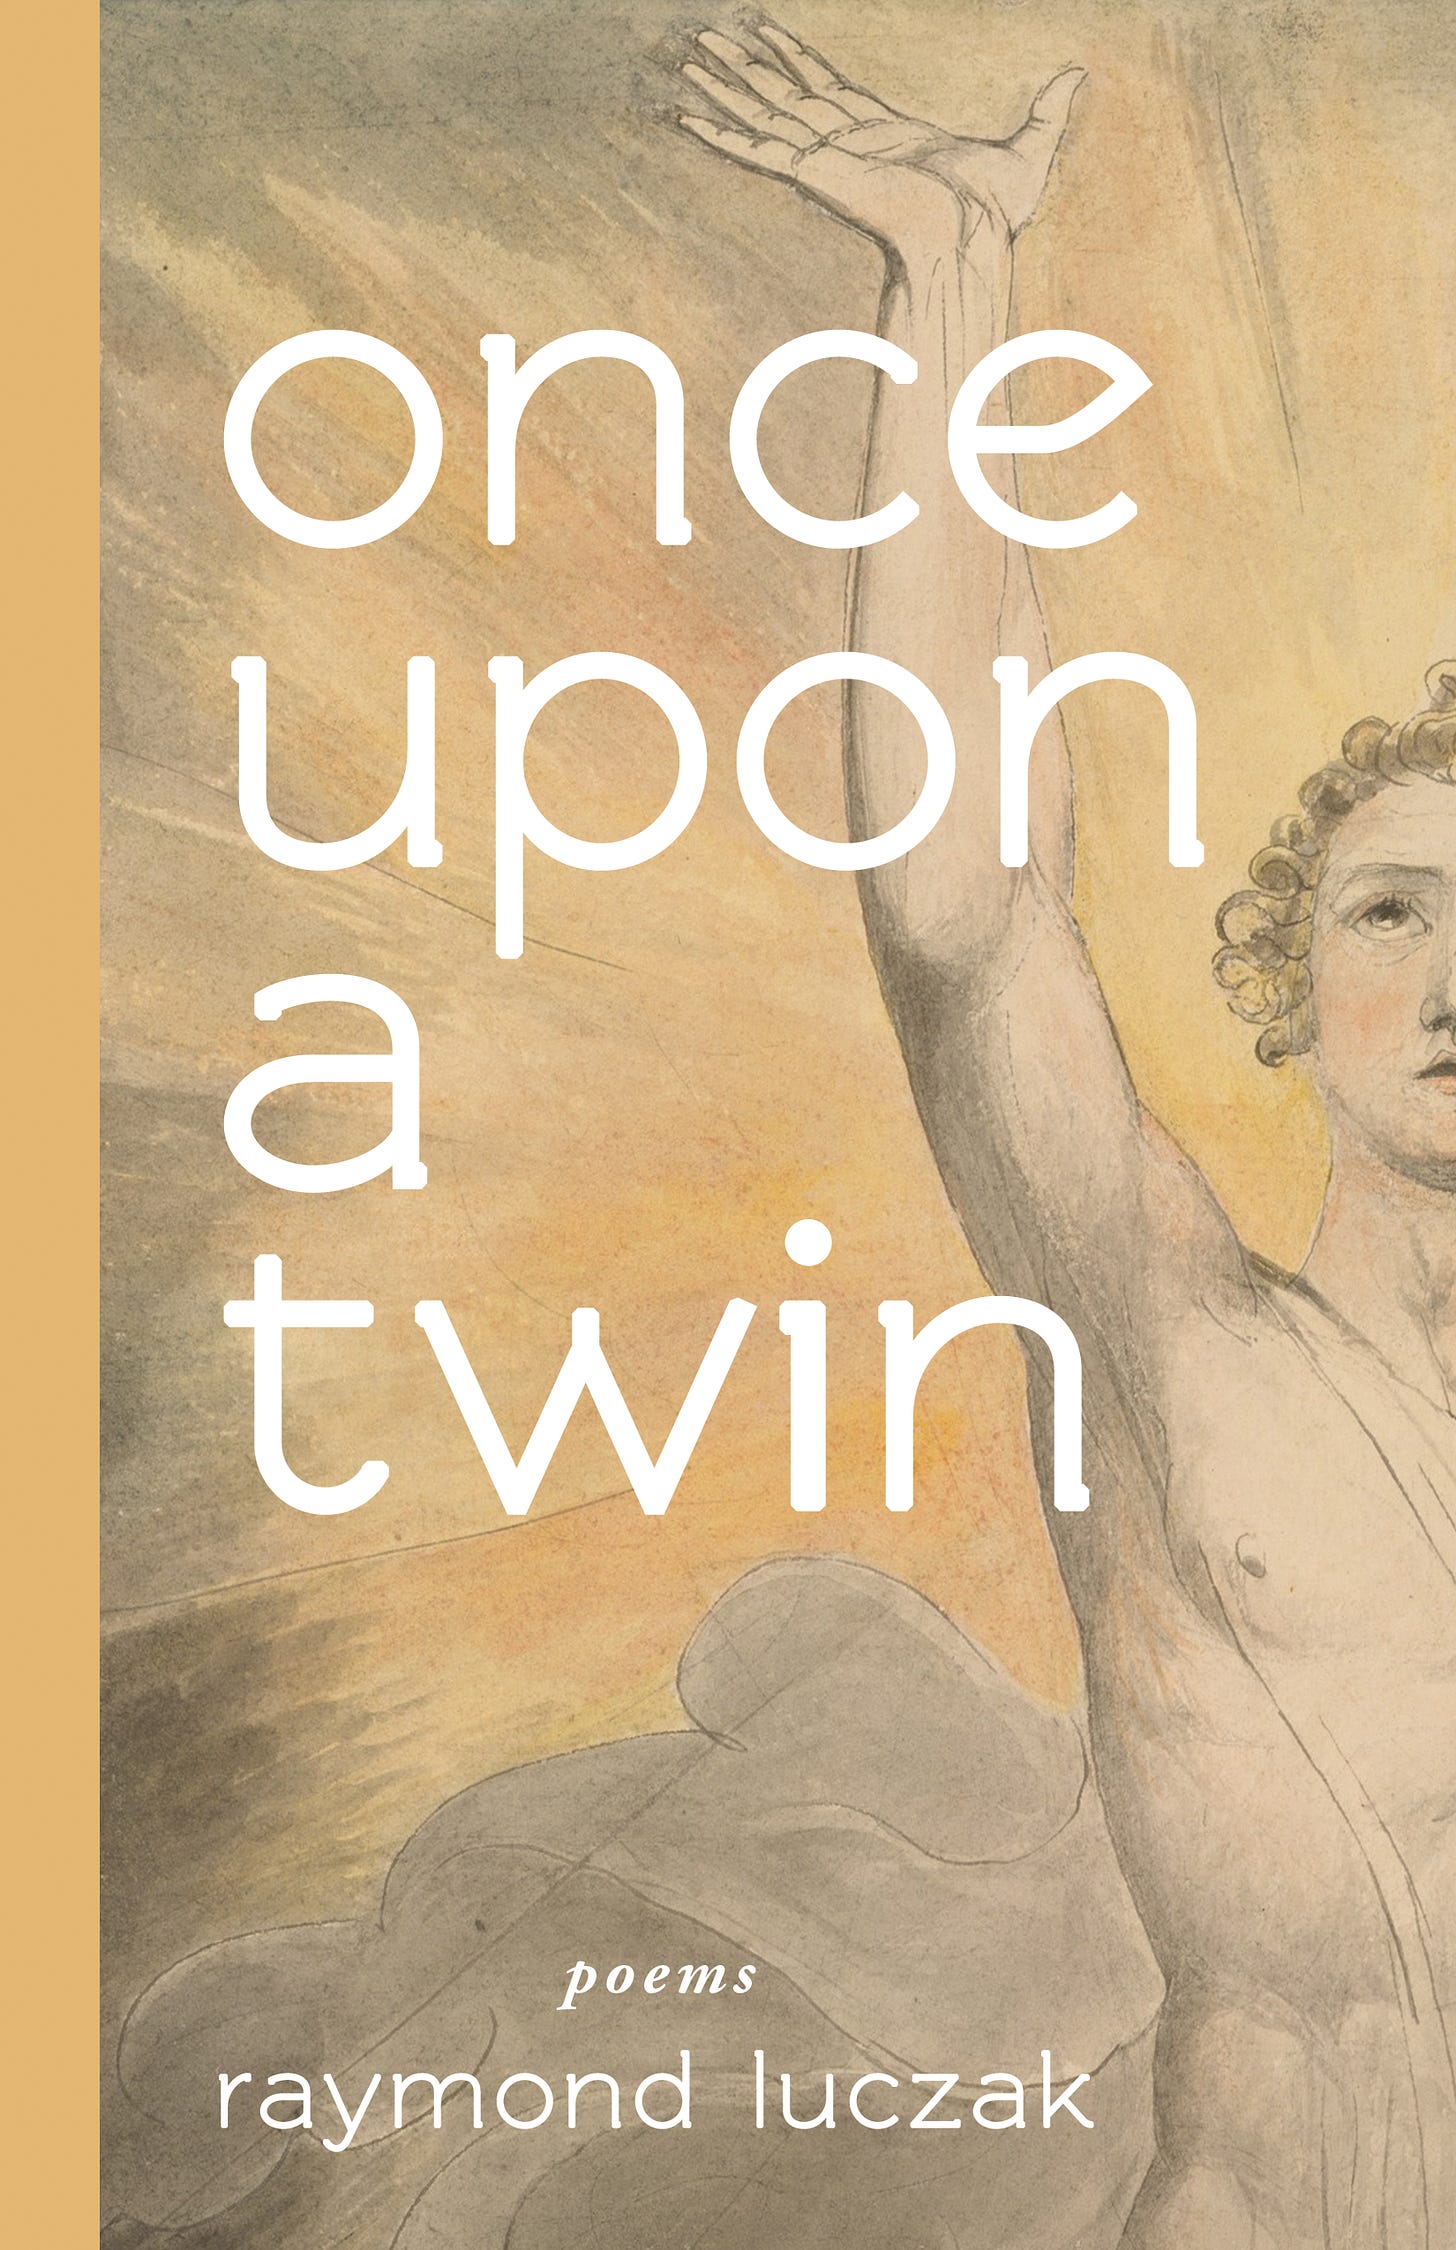 Book cover featuring artwork by William Blake. On right side of cover is half of a partially-nude, muscular, white-presenting angel with curly golden hair. He is looking up to the heavens with one arm stretched upwards, palm open. In the background is a grey cloud and an ochre-hued burst of light. White text overlaying the image reads: once upon a twin, poems, raymond luczak. Cover Design by Mona Z. Kraculdy